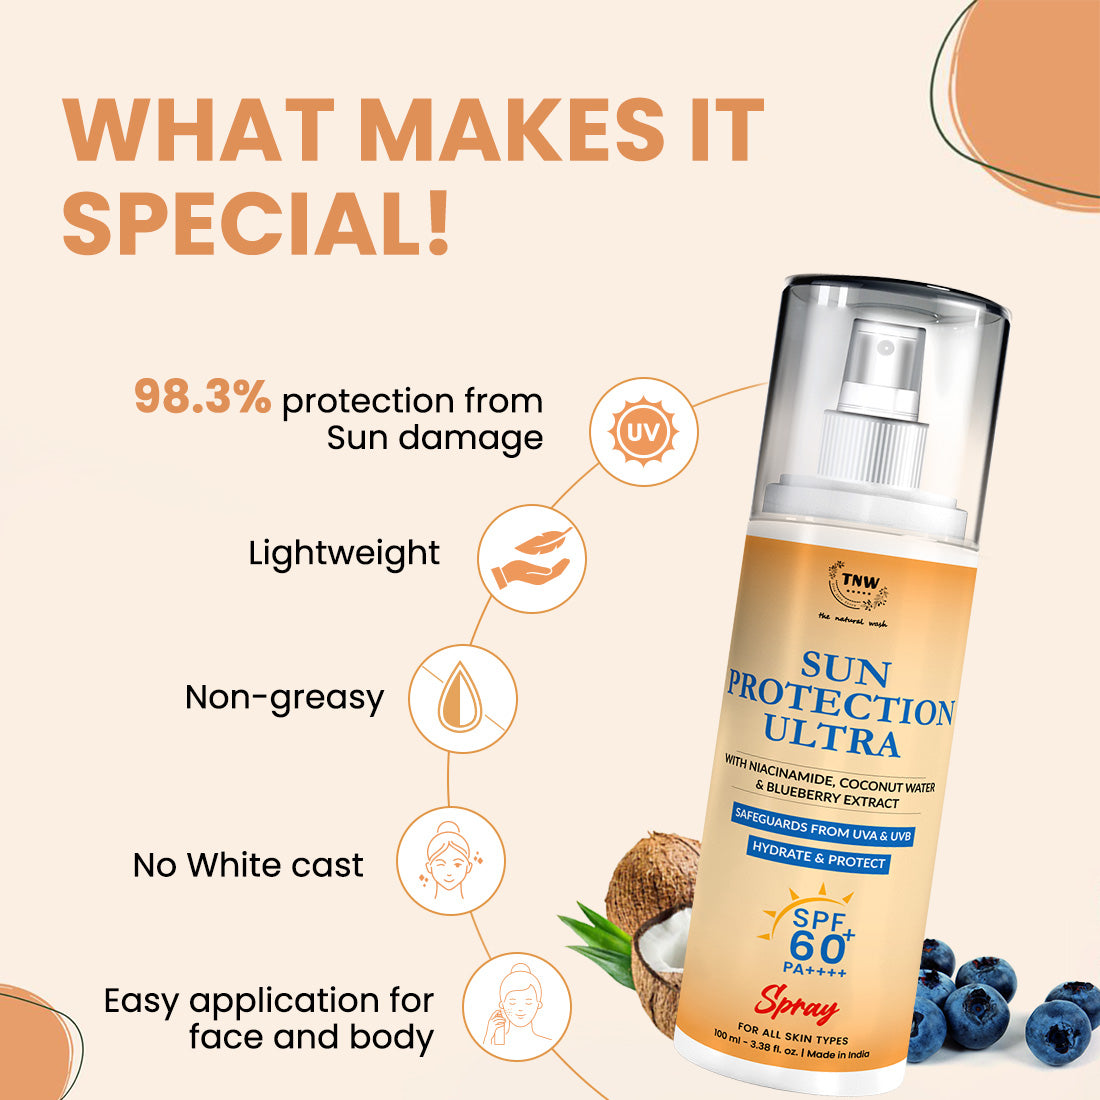 SUN Protection ULTRA SPF 60 SPRAY With Niacinamide & Hyaluronic Acid | For Ultra Sun Protection Against UVA/UVB.